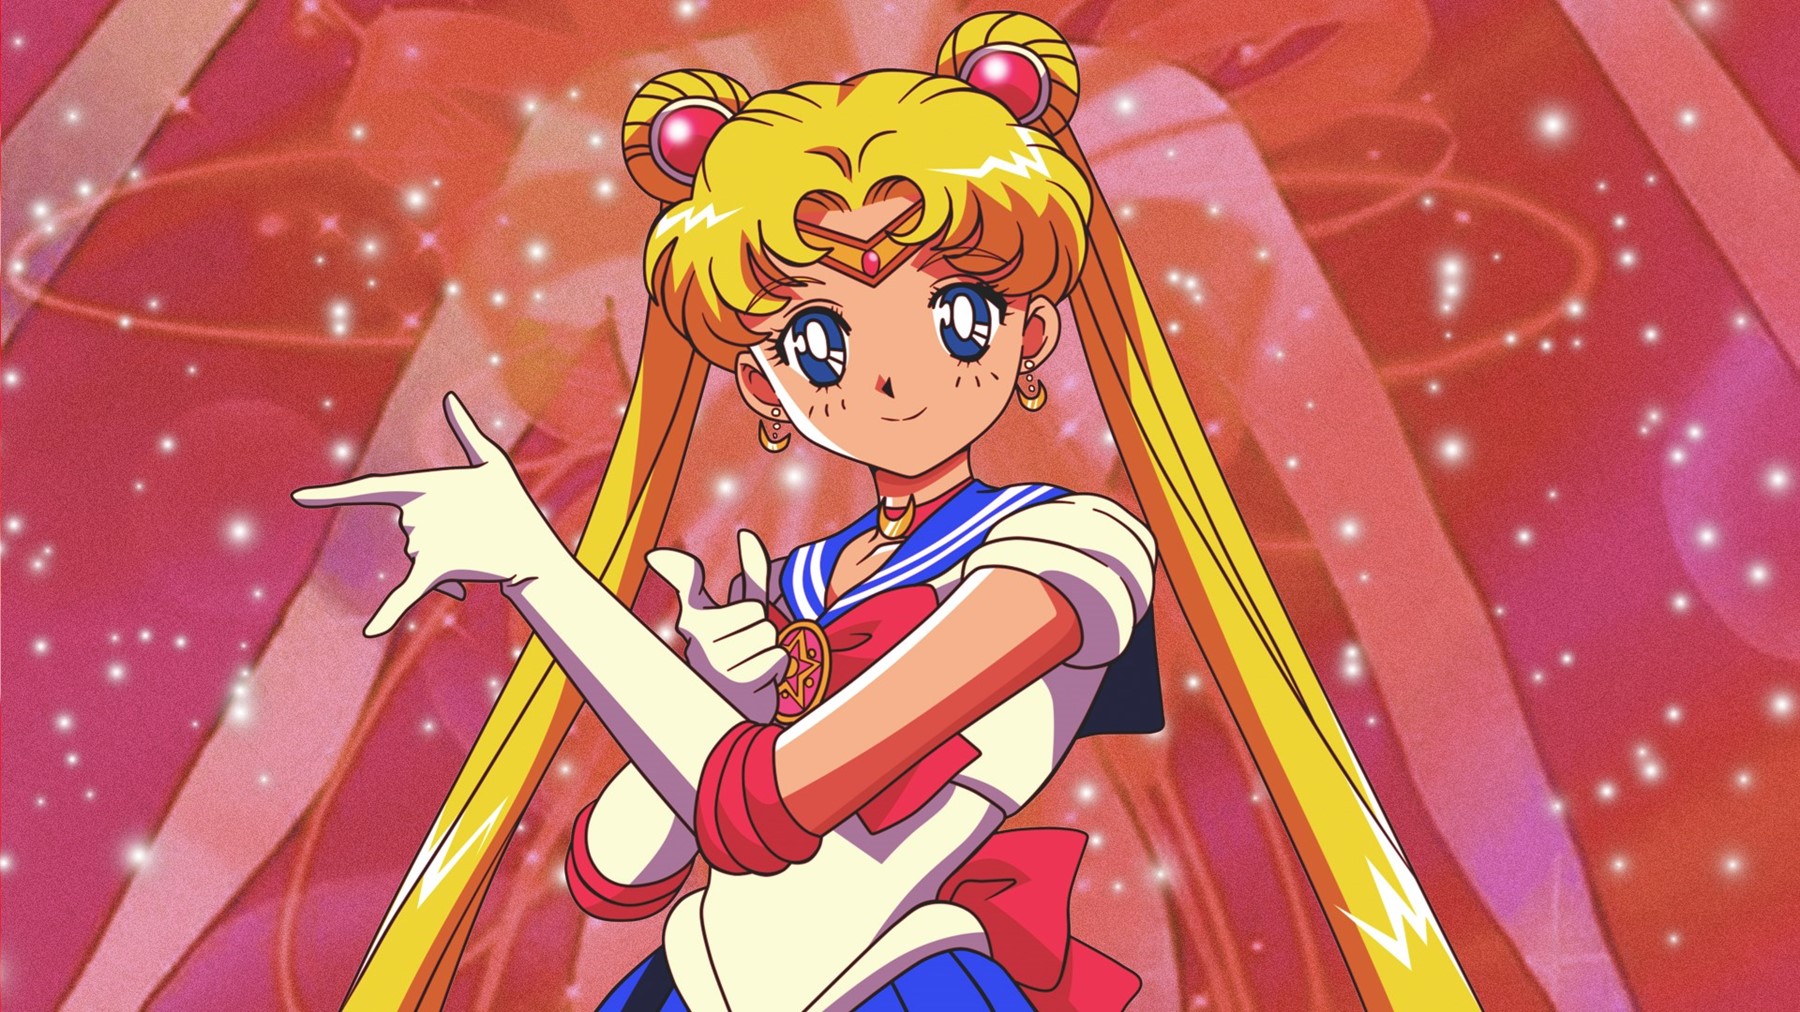 Sailor Moon Anime in Chronological Order (Including Movies)